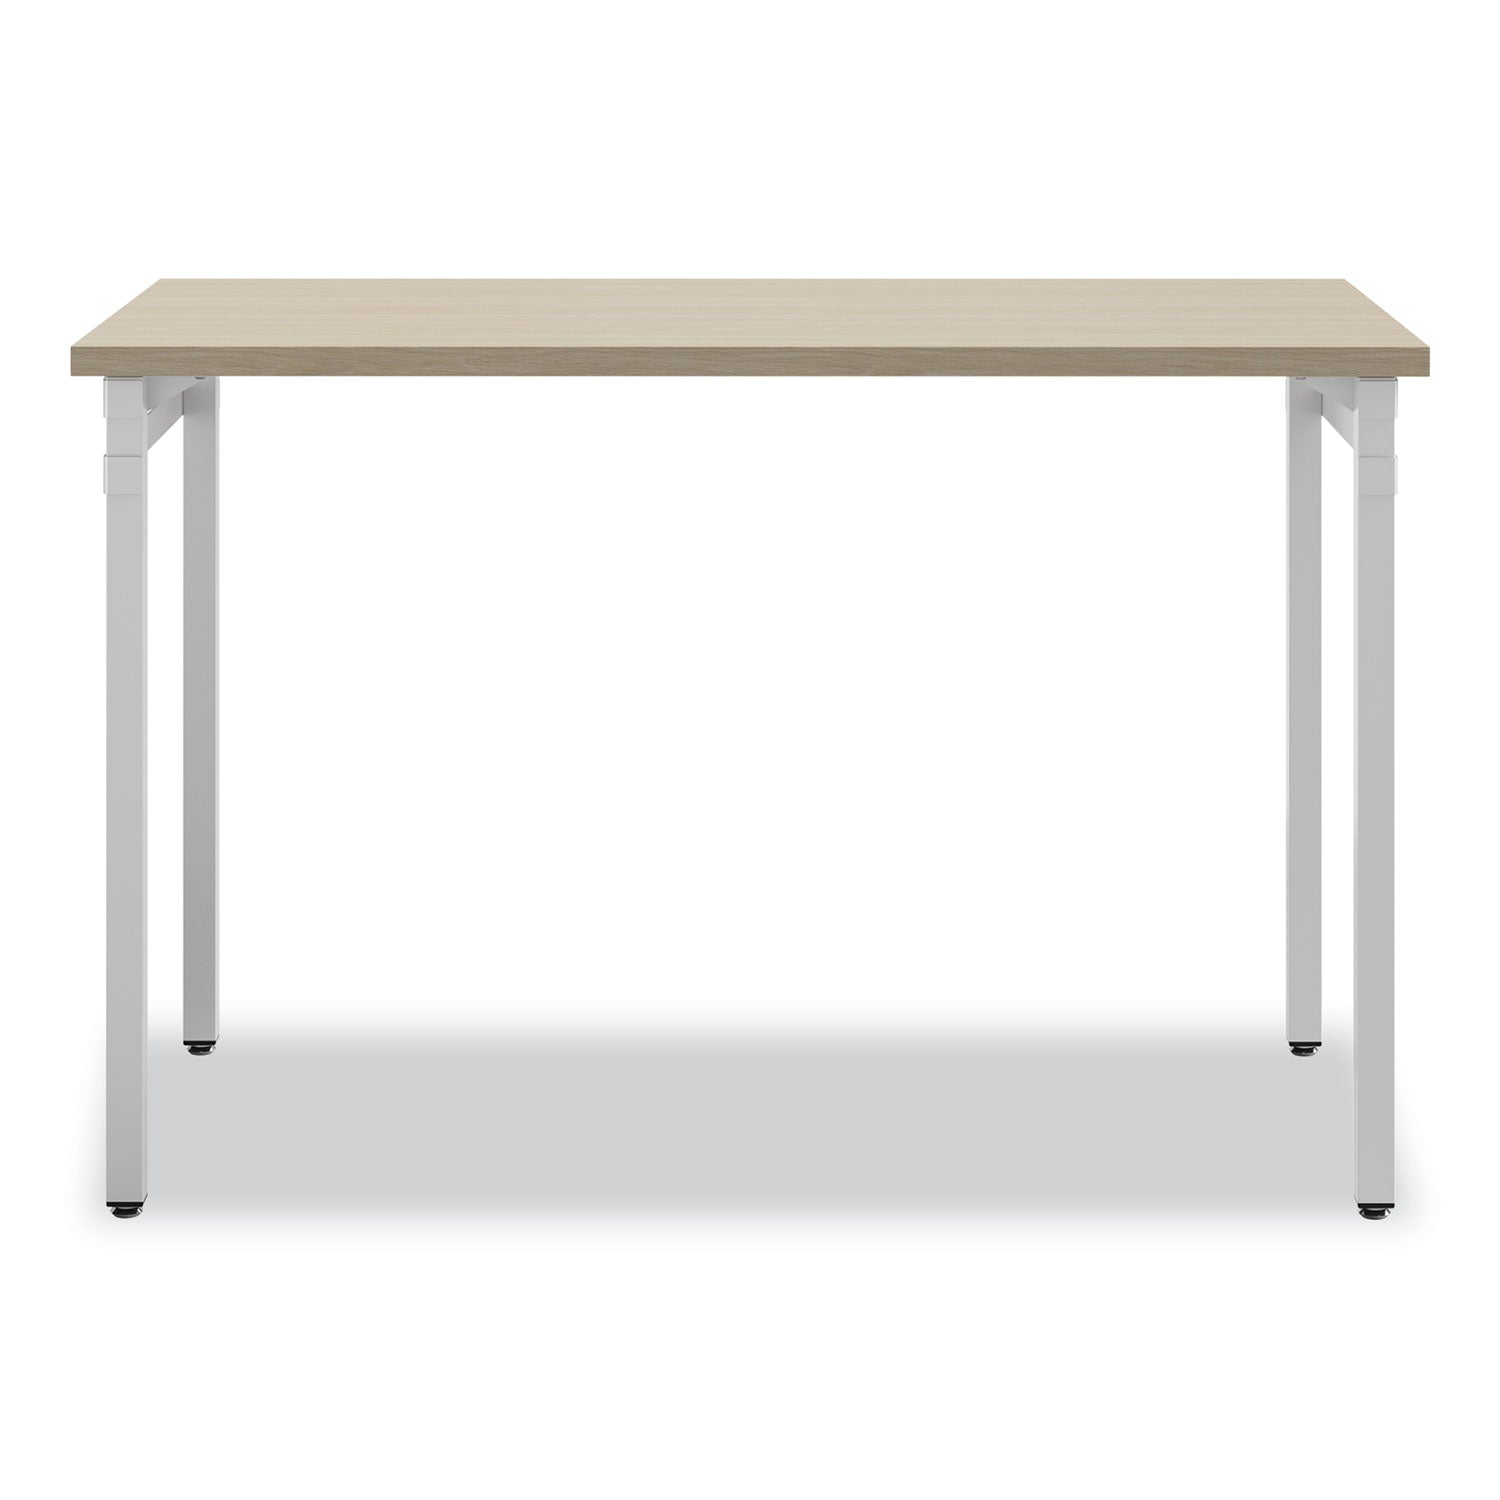 ready-home-office-desk-455-x-235-to-295-beige-white-ships-in-1-3-business-days_saf5508whna - 2